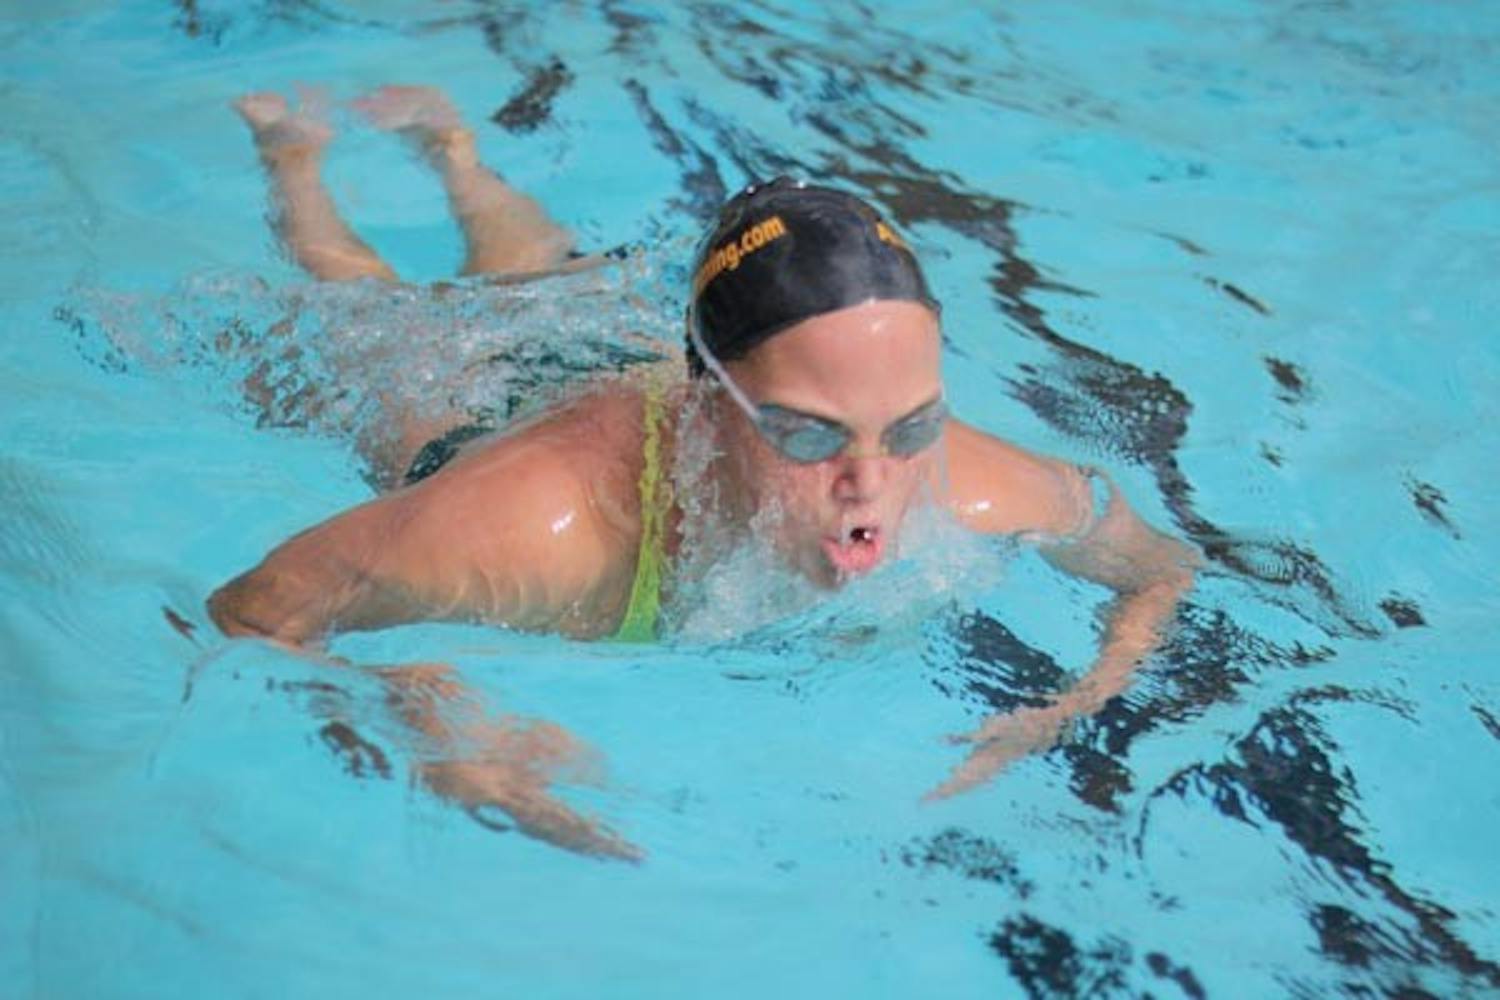 POOL PROWESS: Freshman swimmer Tristin Baxter works out in the pool during a practice earlier this season. Baxter and the ASU women's swim team topped Kansas and UNLV in Tucson over the weekend to open the season. (Photo by Andy Jeffreys)